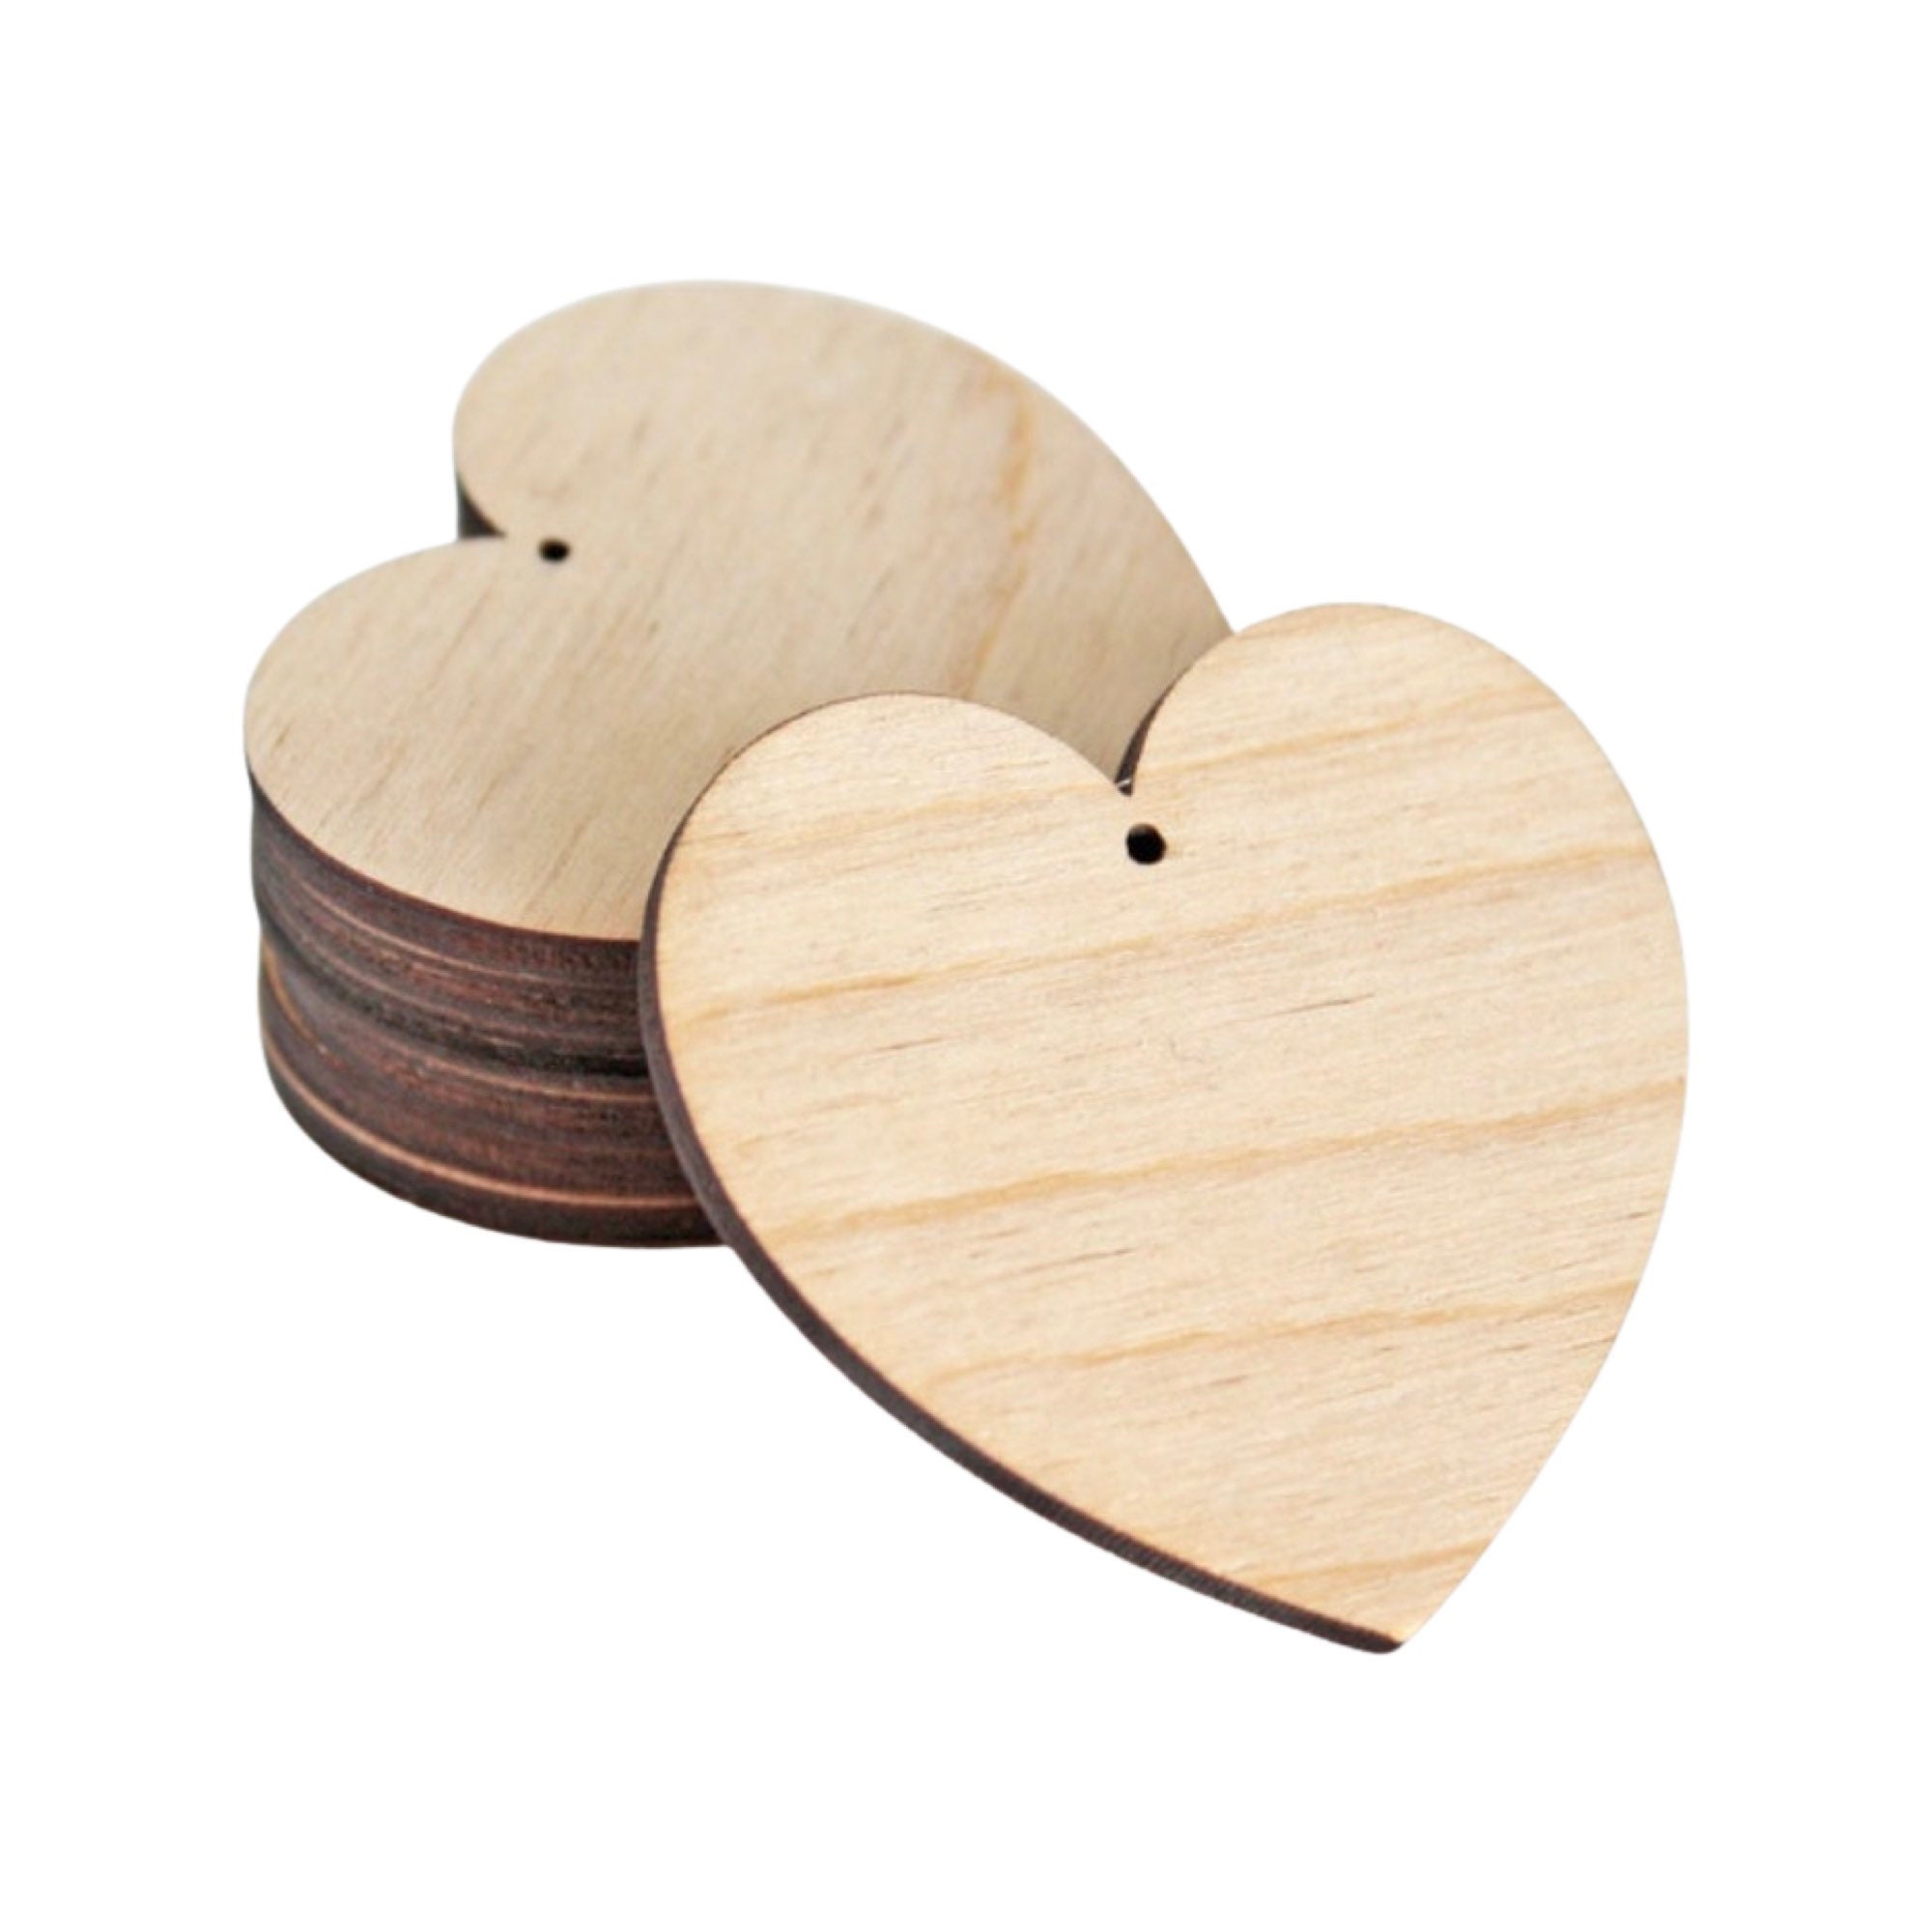 Small Wooden Hearts LOVE Inscription for Decoration Jewelry Scrapbooking  Lot of 40/80 Hearts -  Finland